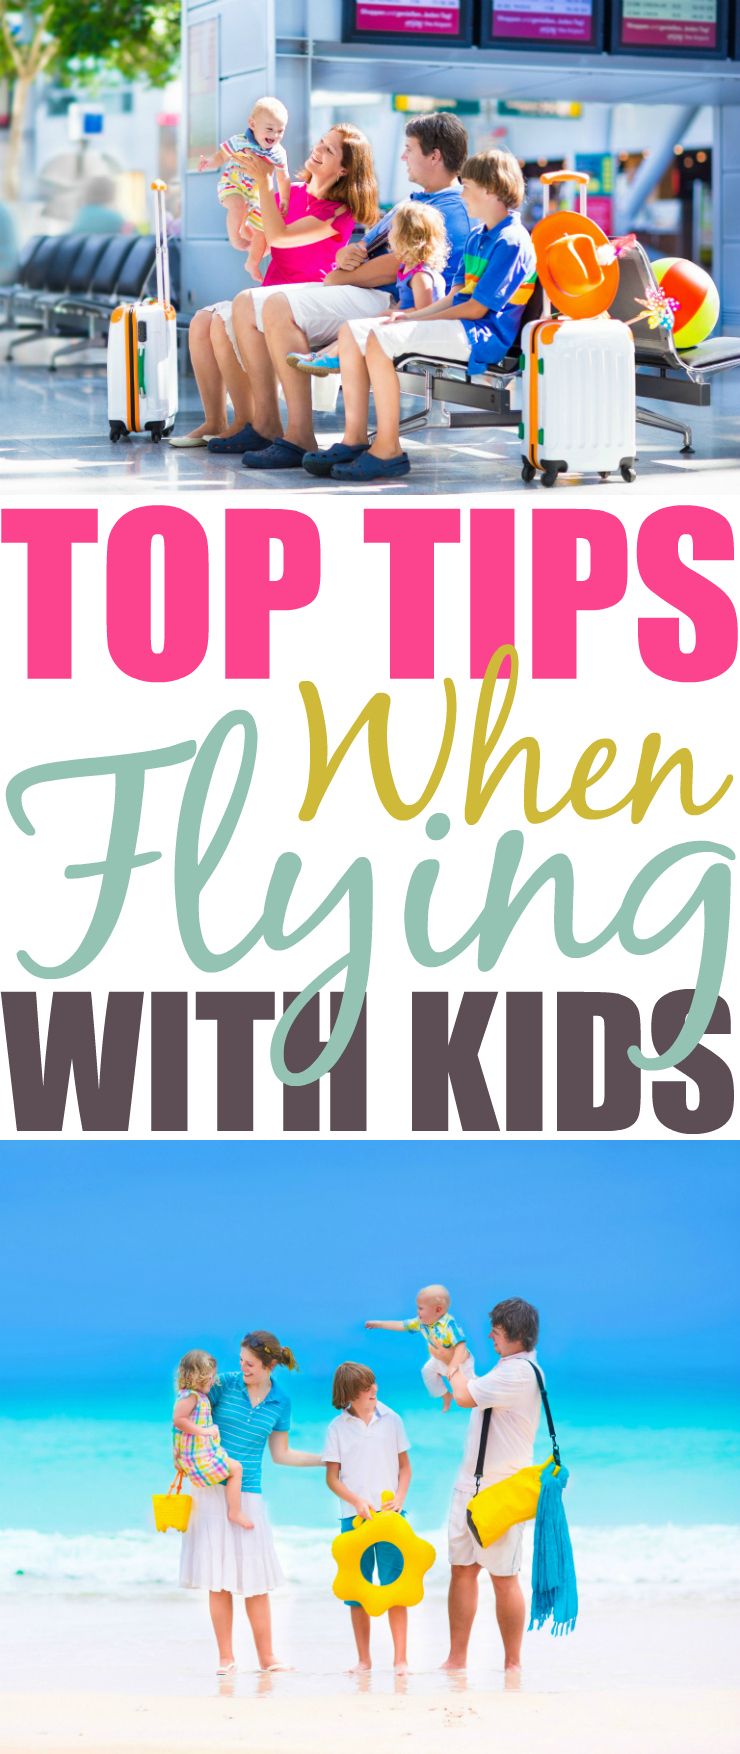 Top Tips for Flying With Kids